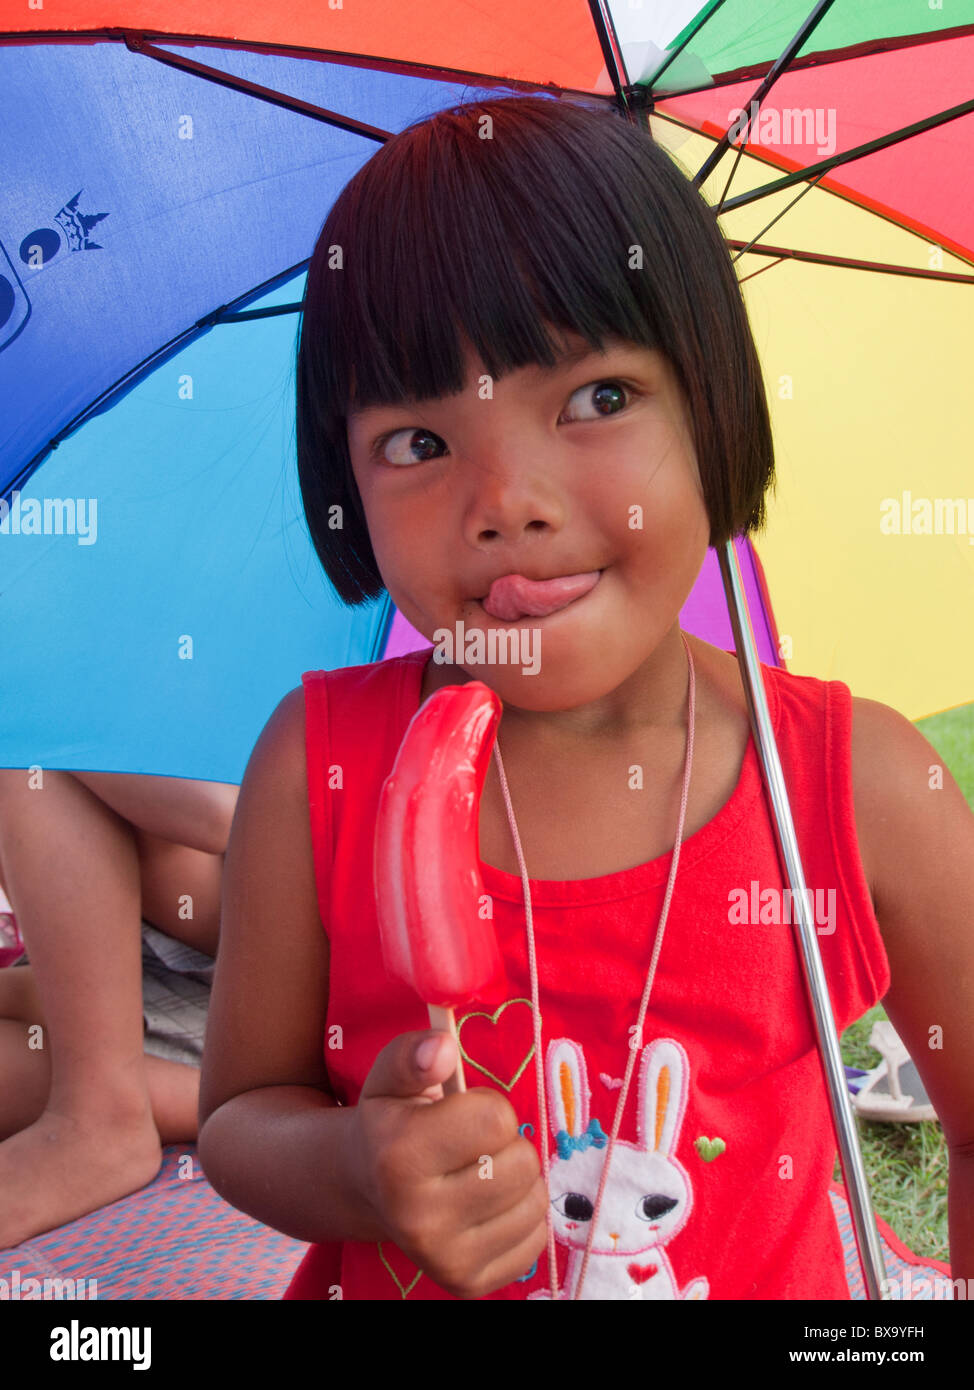 The girl licking her lollipop ice cream and holding her multi color umbrella Stock Photo